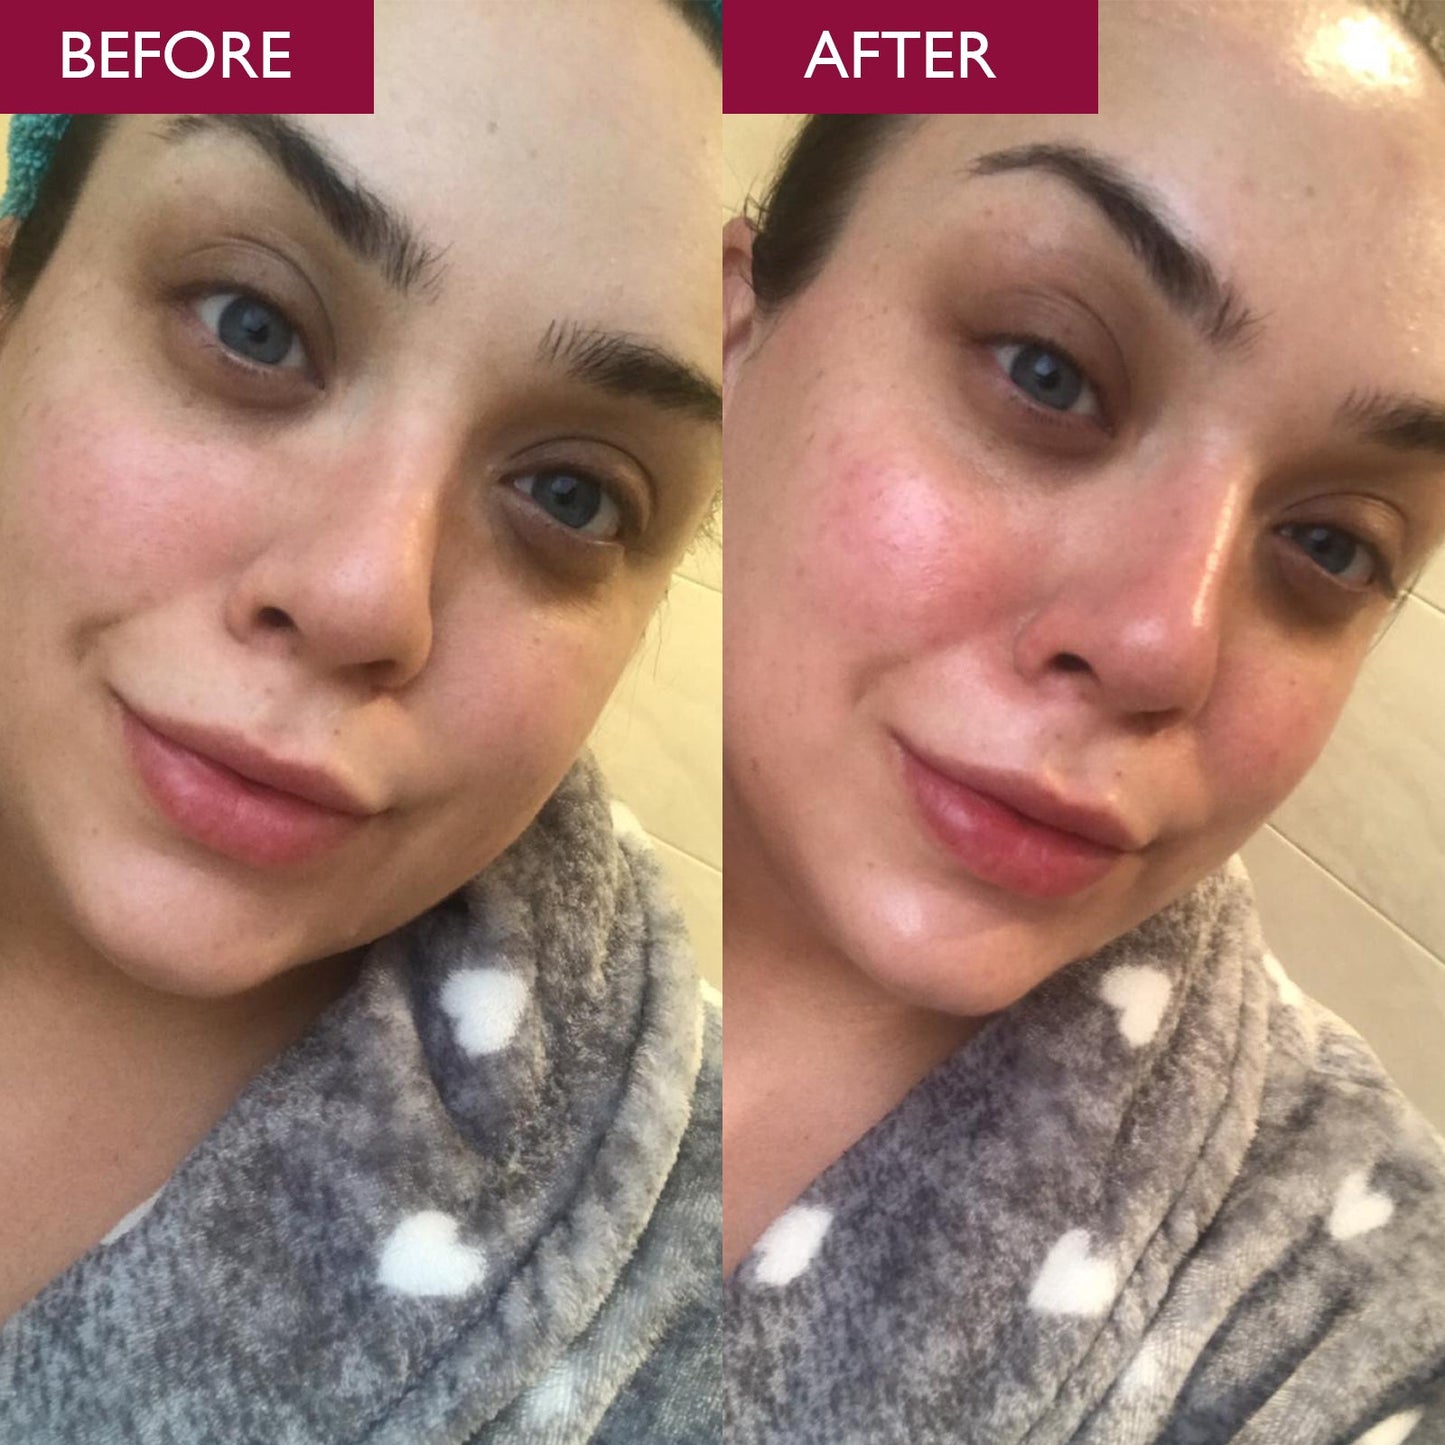 Image of skin before and after using SKINICIAN Pro-Radiance Enzyme Cleanser. Skin looks brighter, smooth and more radiant